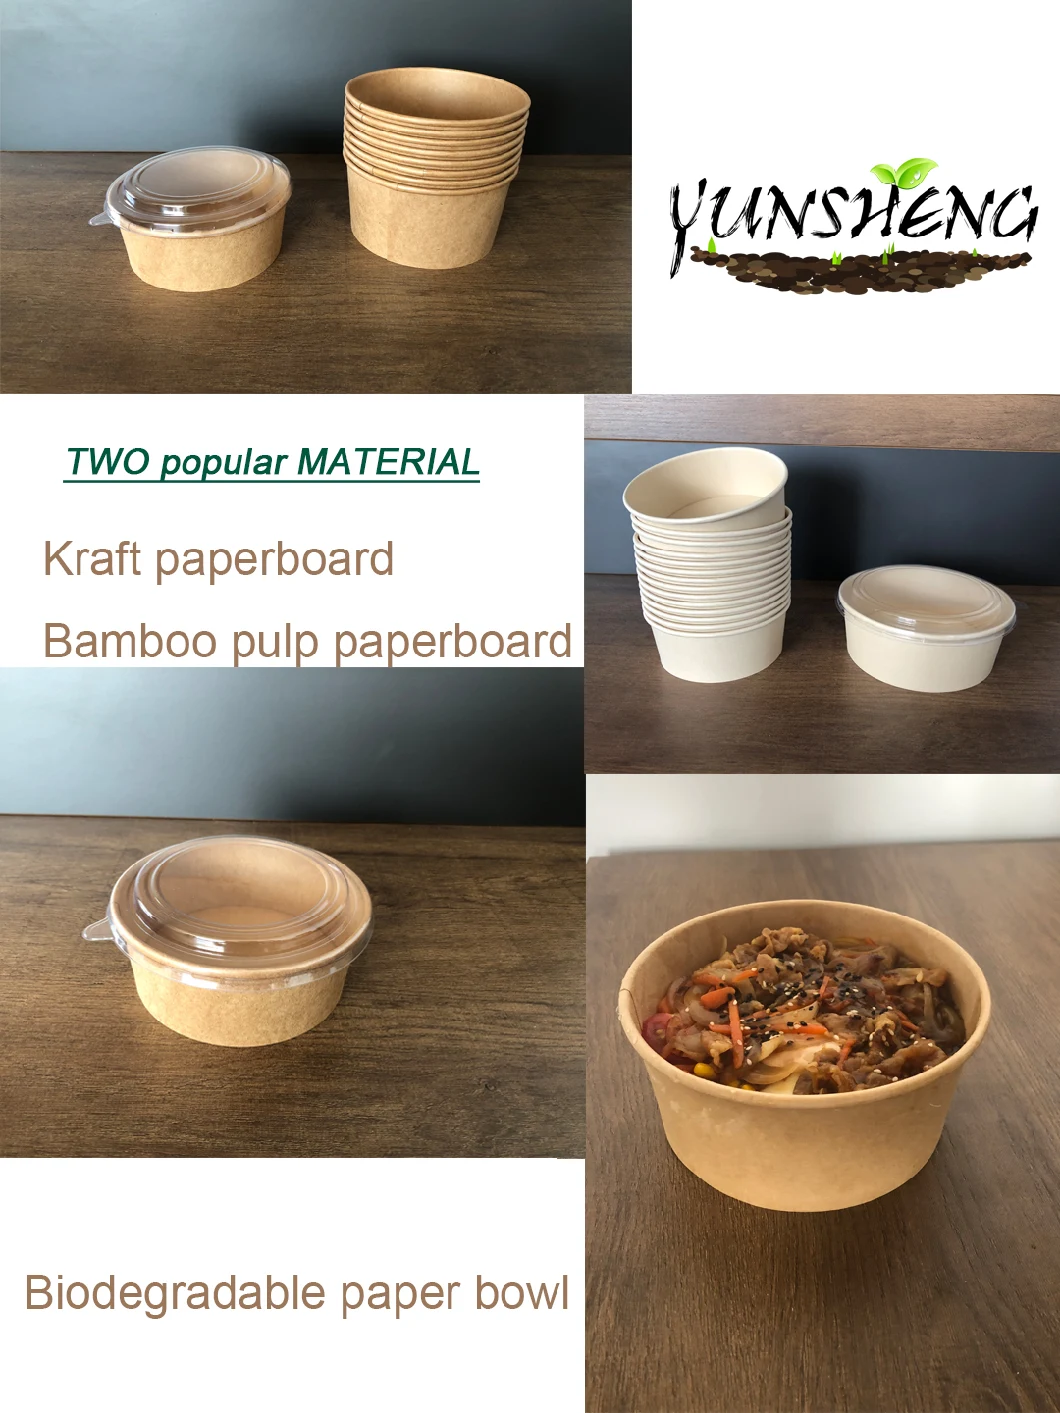 Compostable White Bagasse or Bamboo Fiber Paper Disposable Lunch Box with Two/Three Compartments with Clamshell